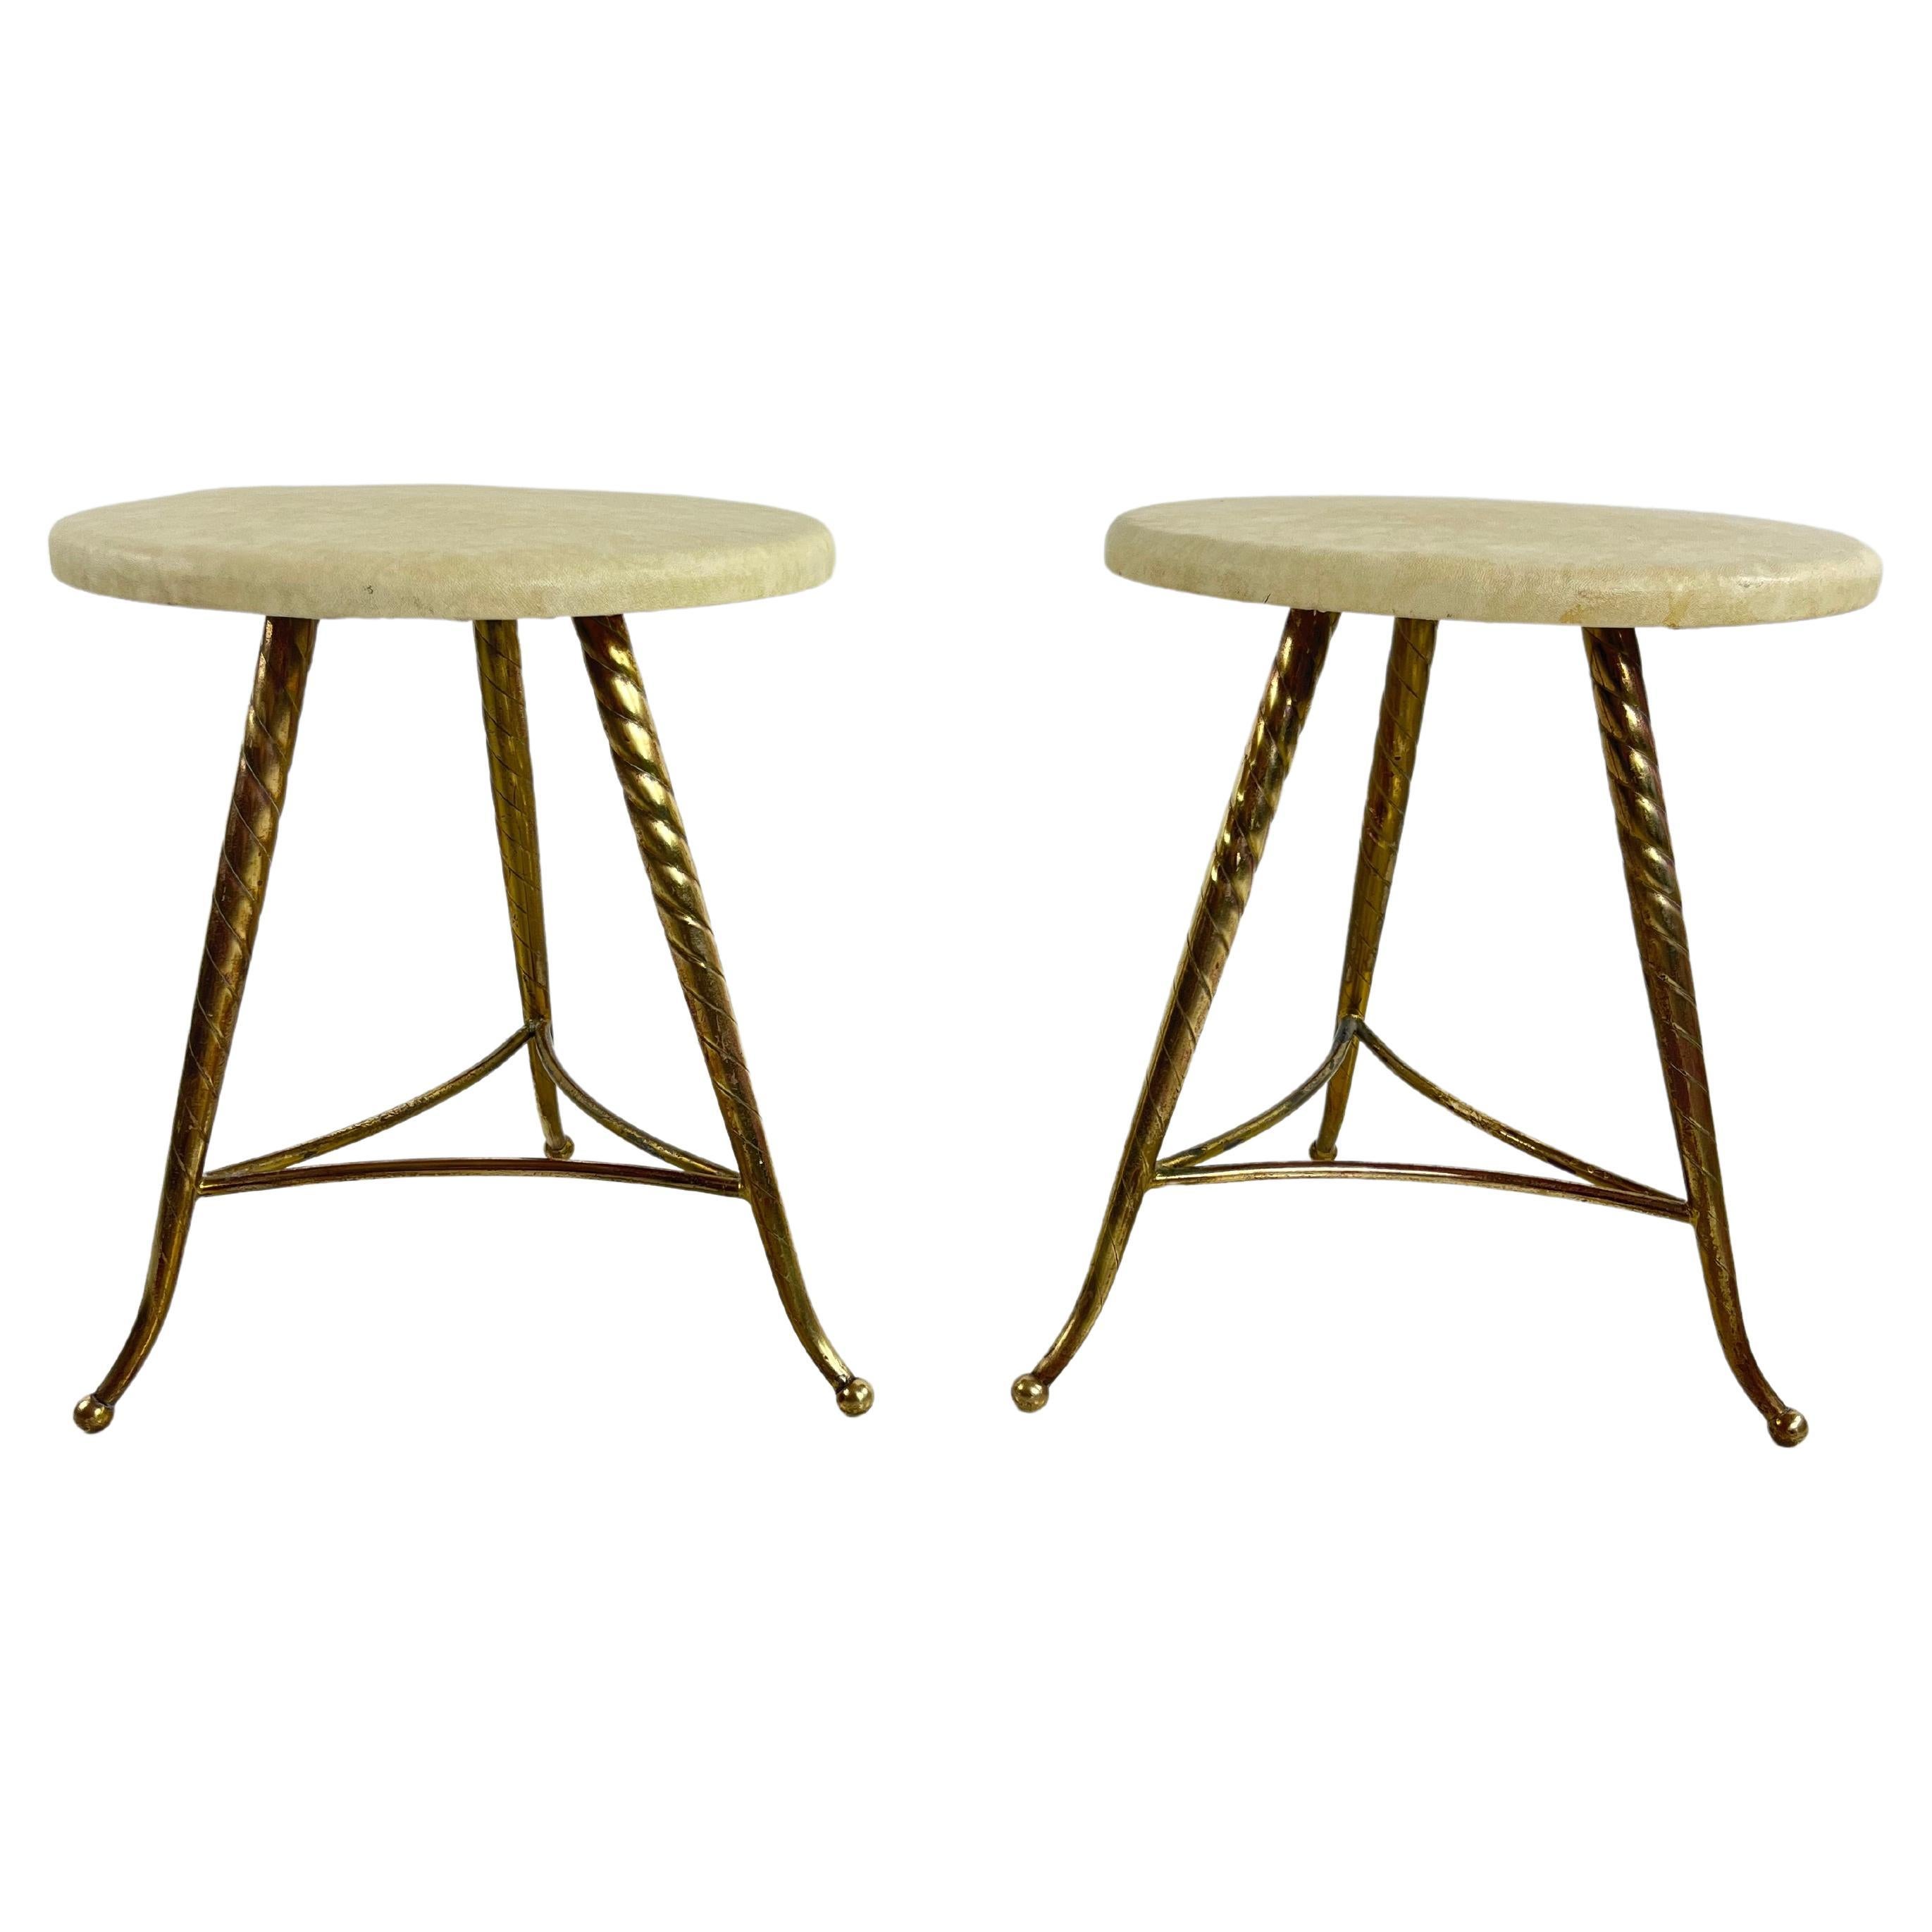 Set of 2 Mid-Century Brass Stools Attributed to Paolo Buffa 1950s For Sale